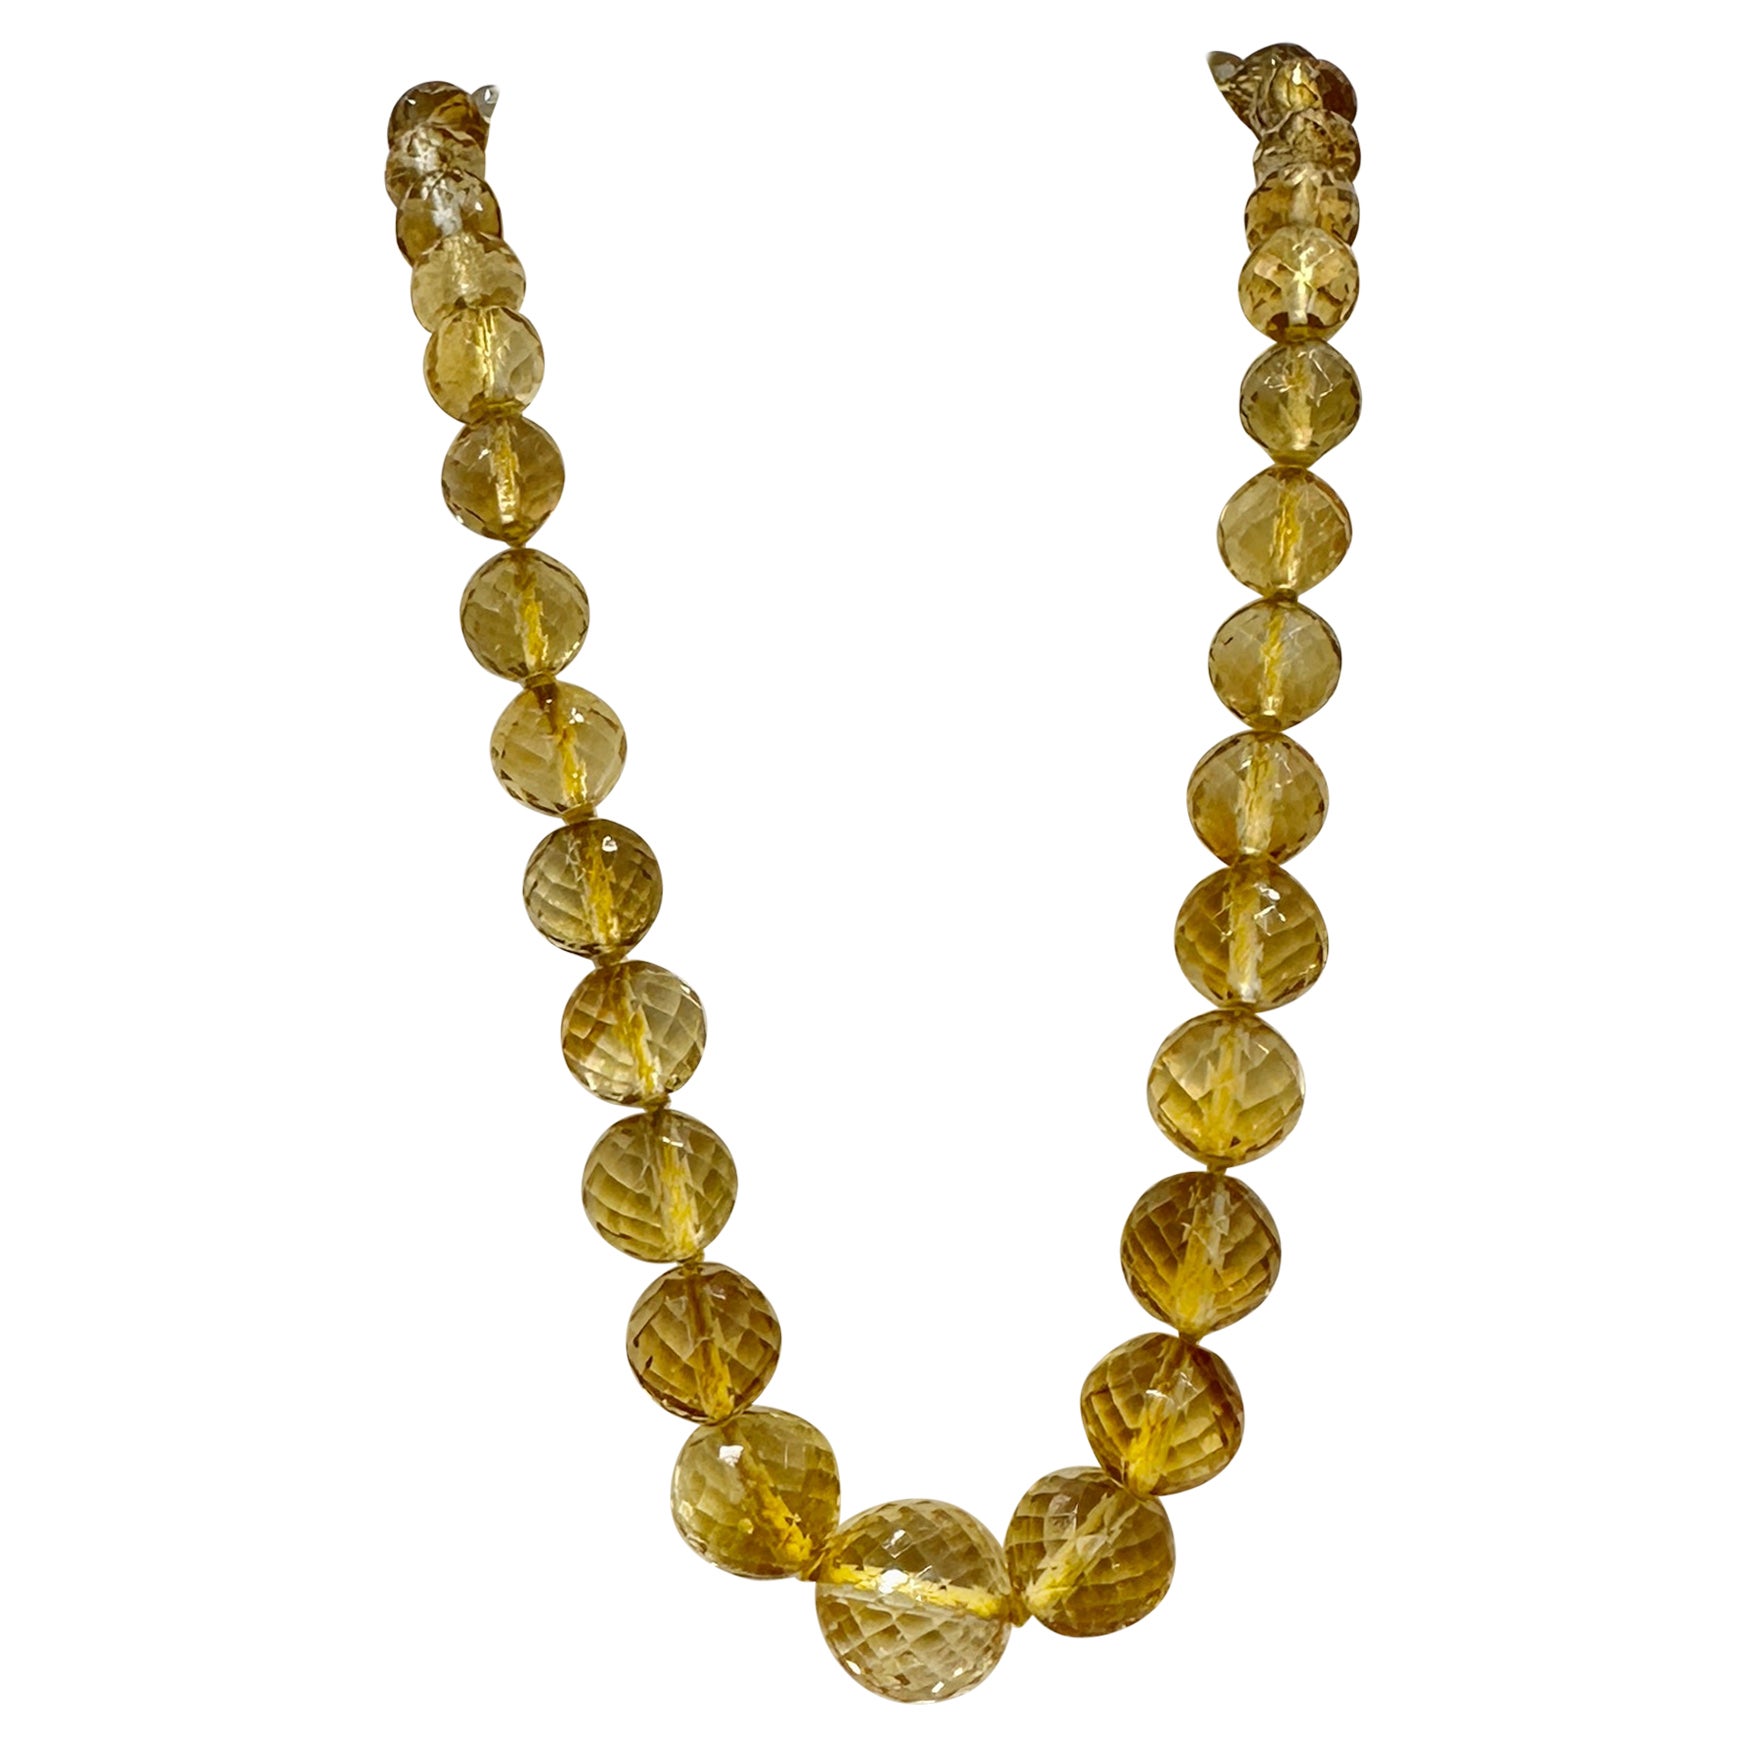 Art Deco Faceted Citrine Necklace Graduated Citrine Beads Gold Circa 1920